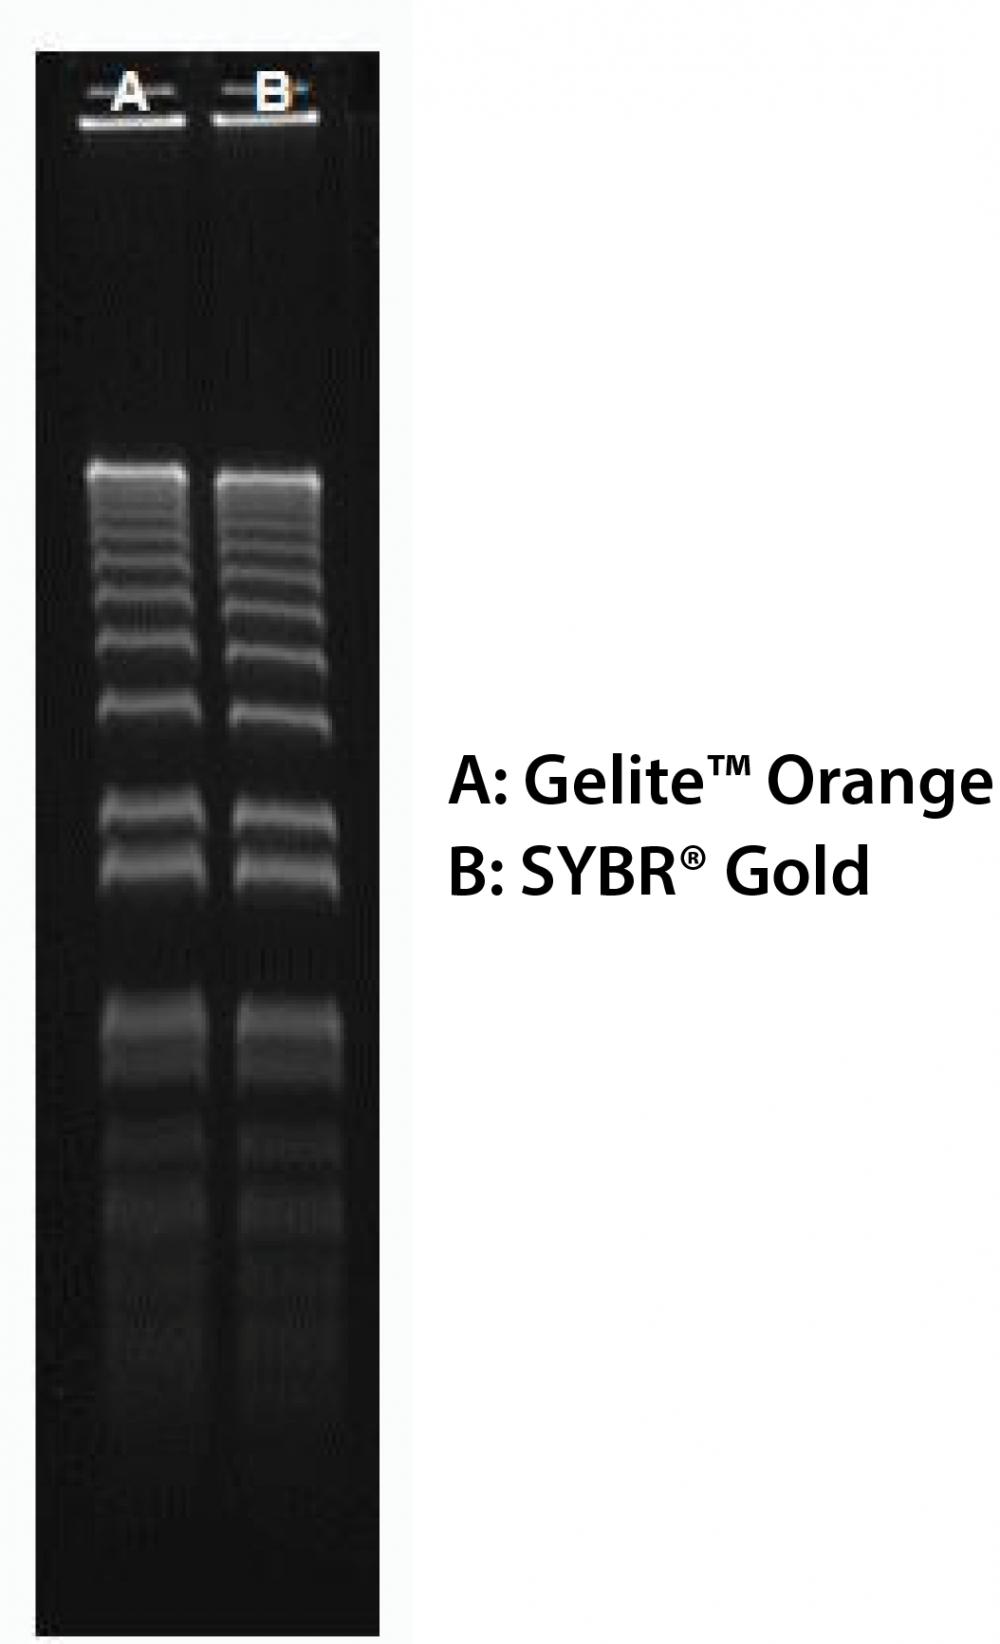 160 ng of 1 kb Plus DNA Ladder &nbsp;(ThermoFisher 10787018) in 0.9% agarose/TBE electrophoresis gel were stained with Gelite&trade; Orange and SYBR&reg; Gold, and imaged with 254-nm UV transilluminator using UVP Bioimaging System.